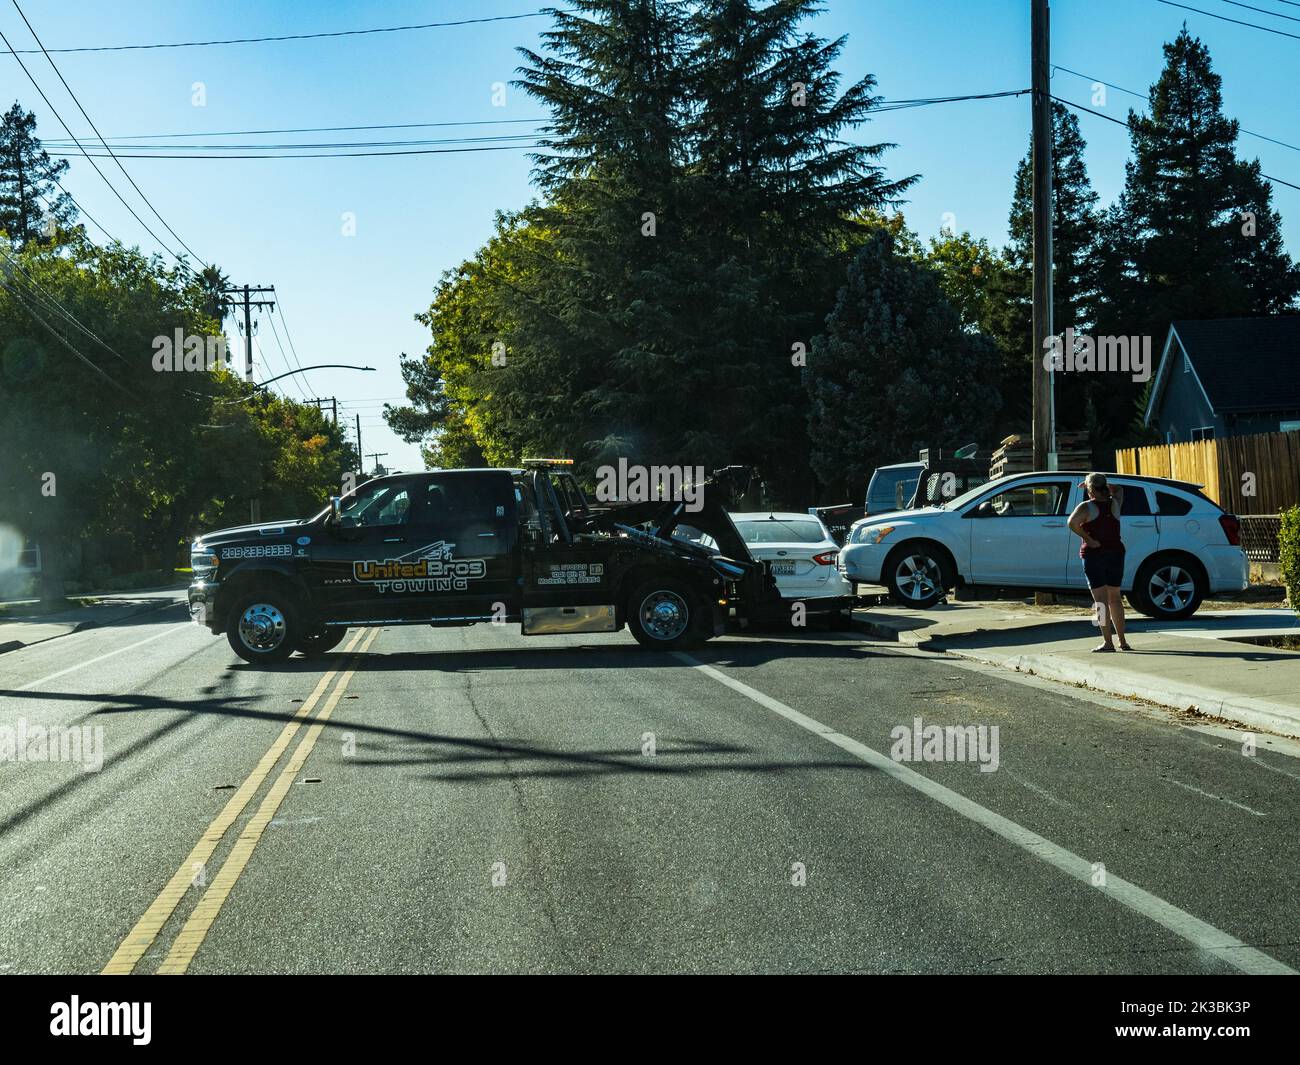 A tow truck drops off a disabled vehicle at a customers home in Modesto California USA Stock Photo